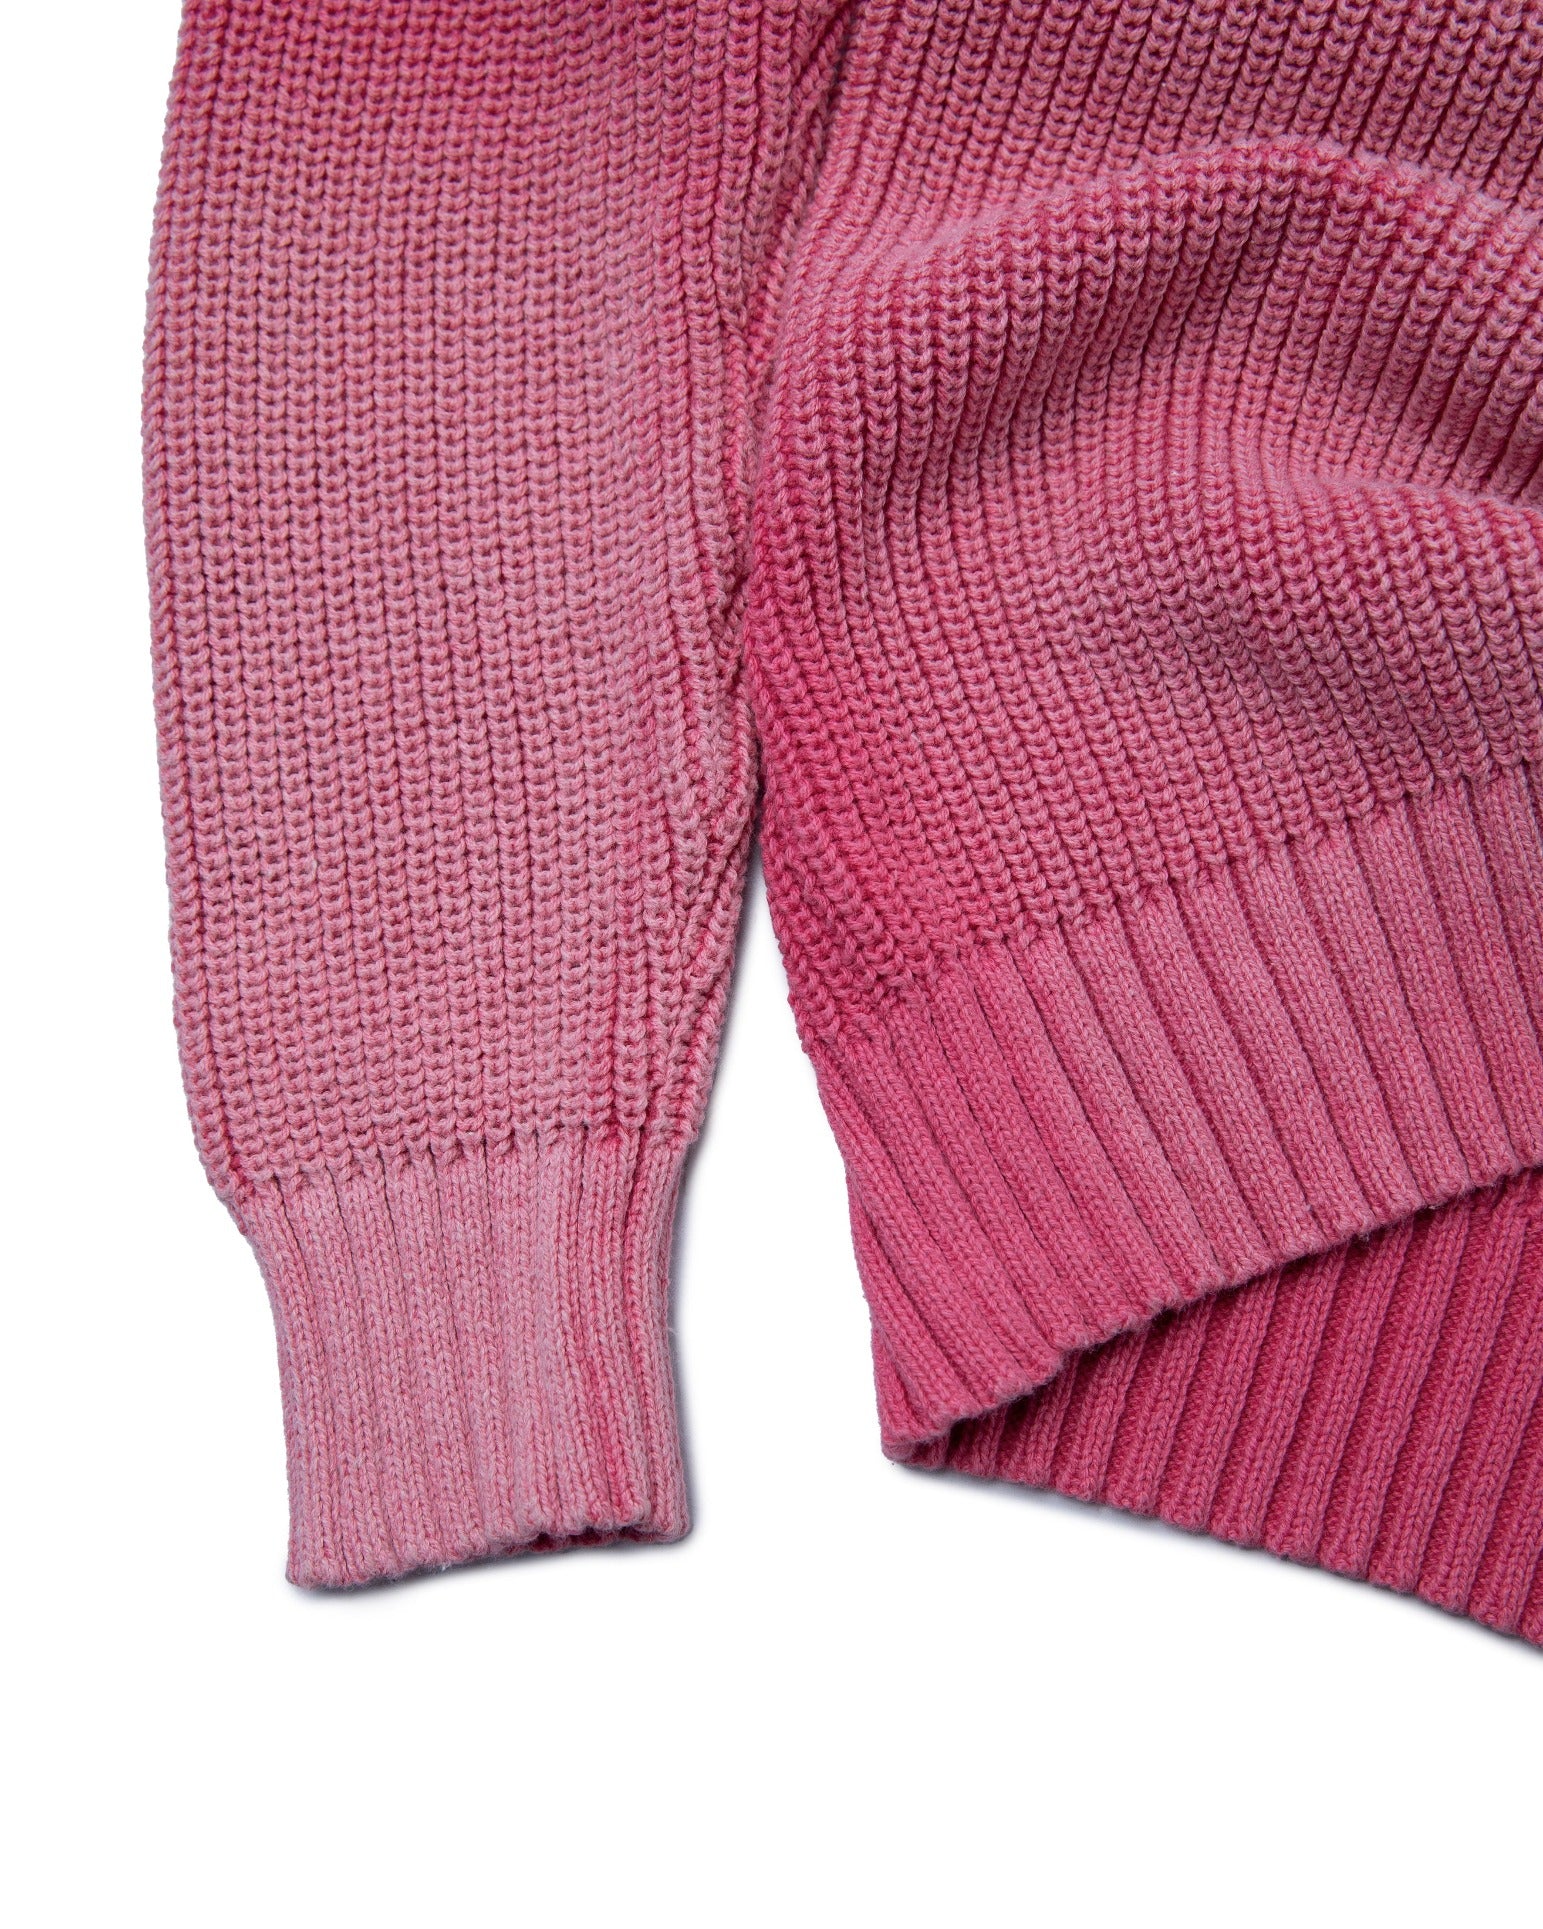 f-a-pink-knit-sweater-GOLDIE-ASTOUD